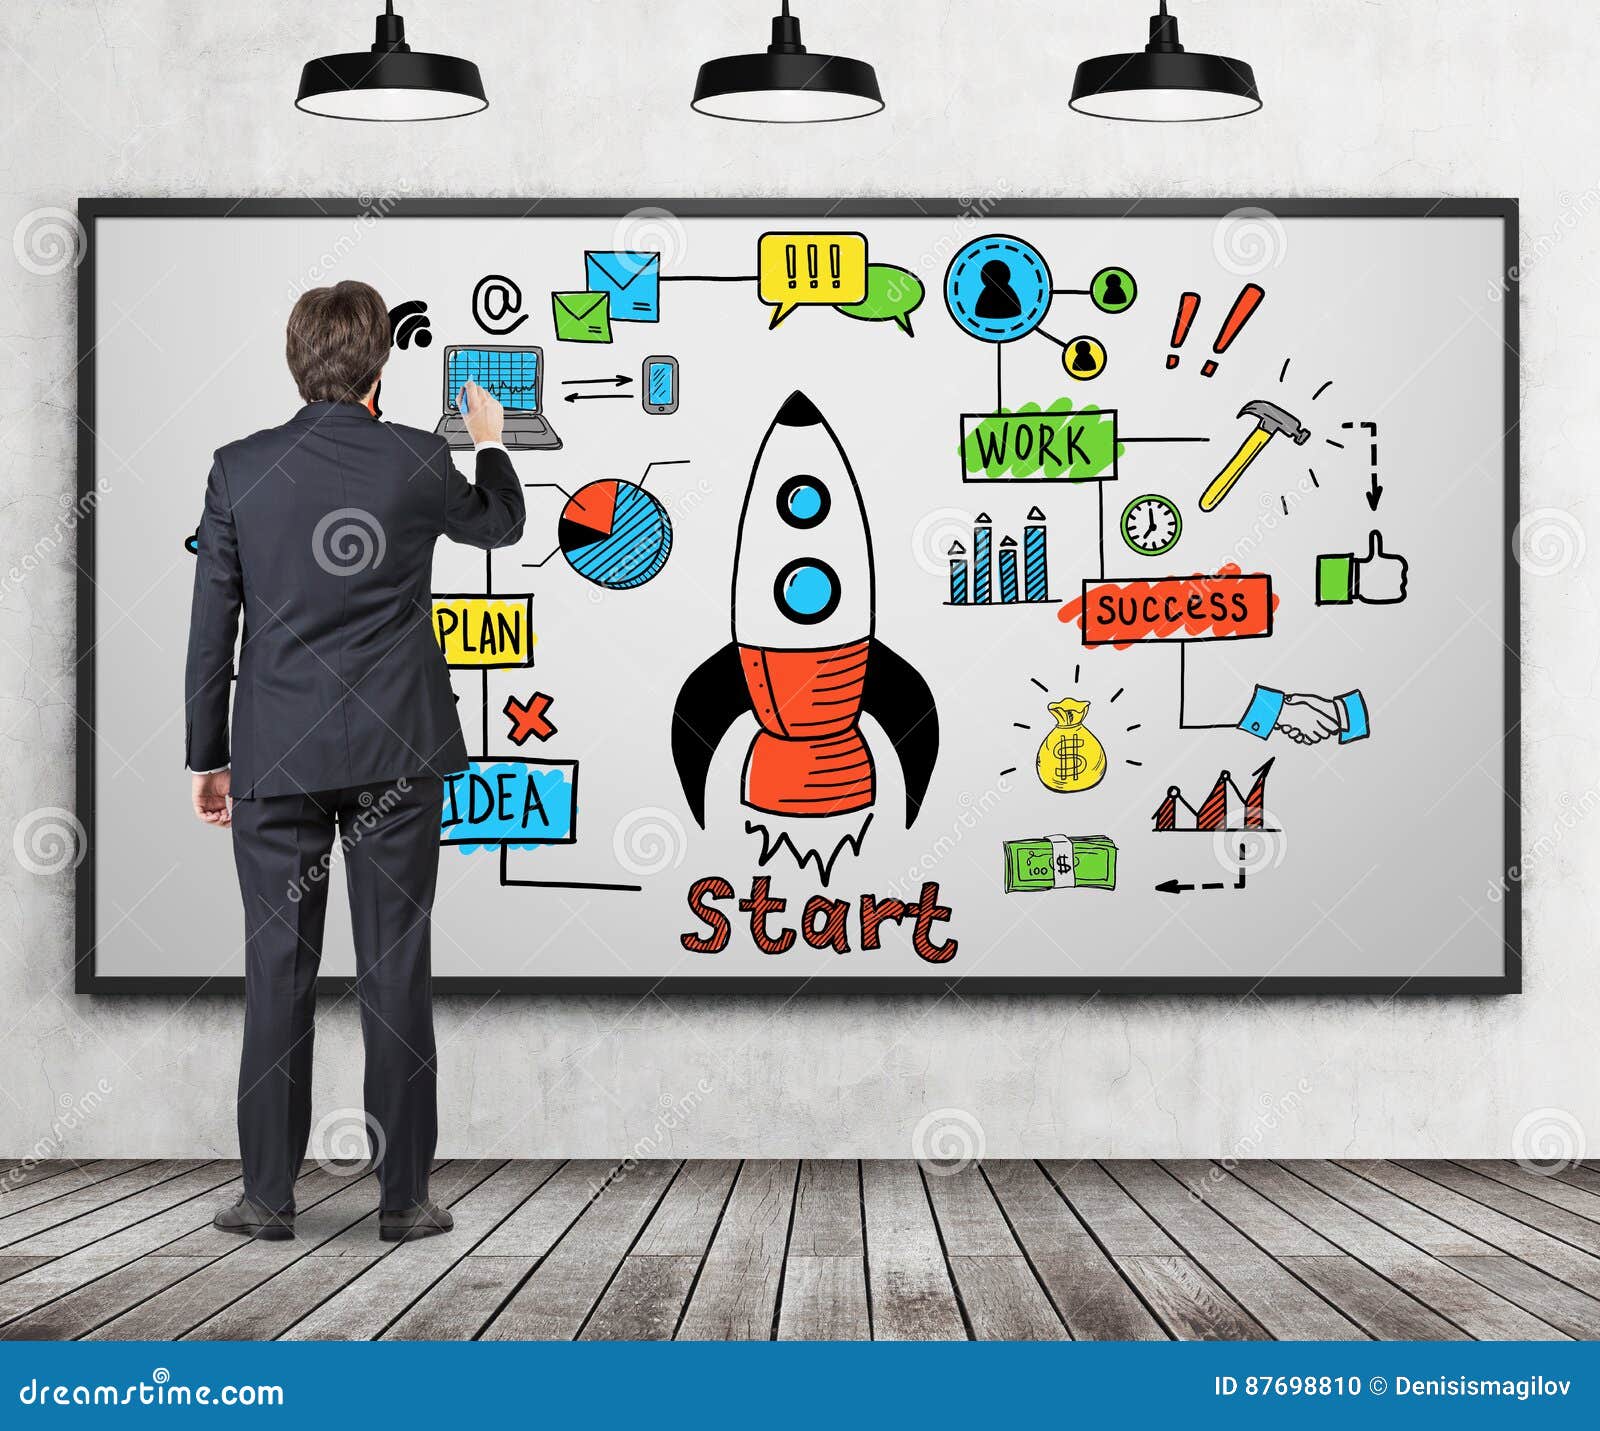 14008 Startup Sketch Stock Photos  Free  RoyaltyFree Stock Photos from  Dreamstime